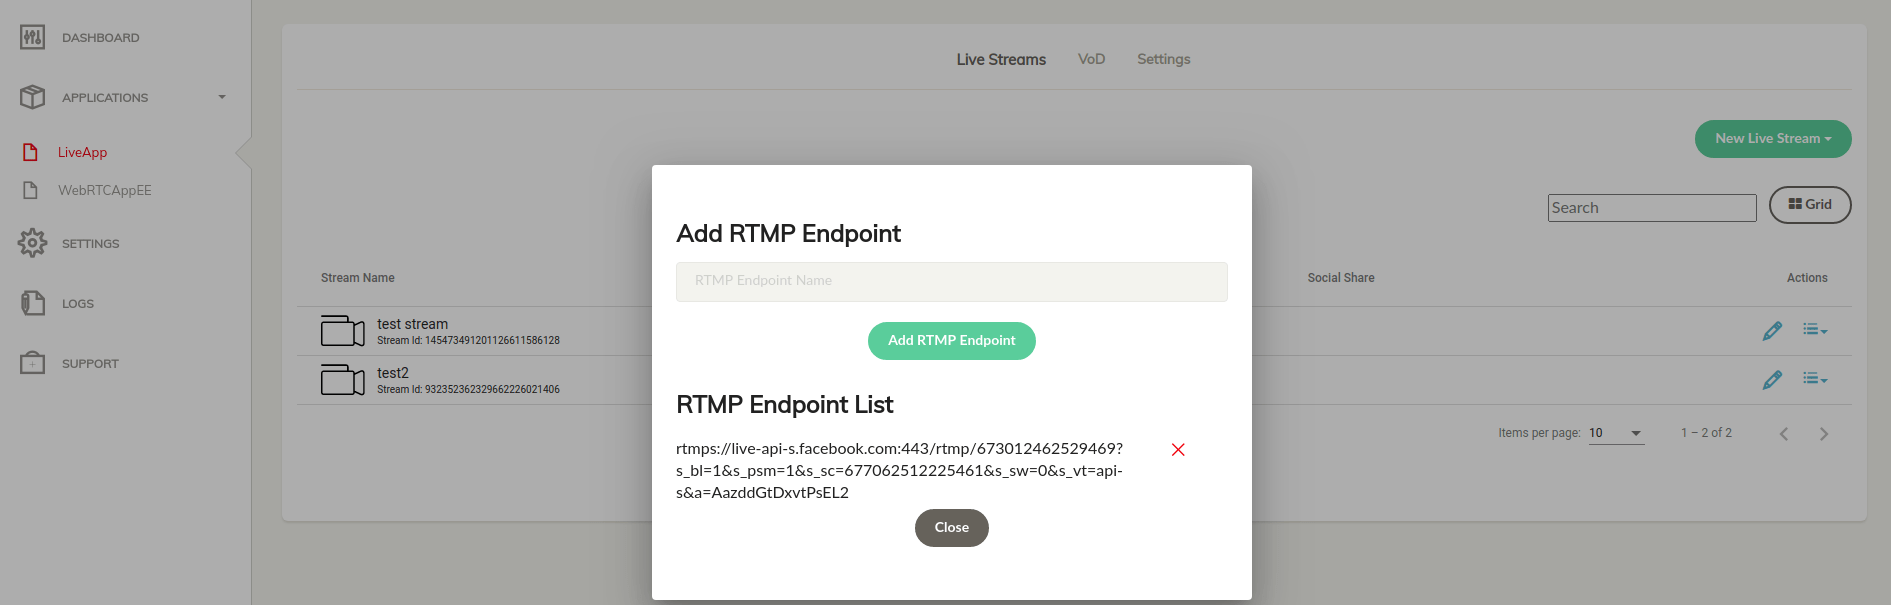 ant-media-dashboard-add-facebook-rtmp-endpoint